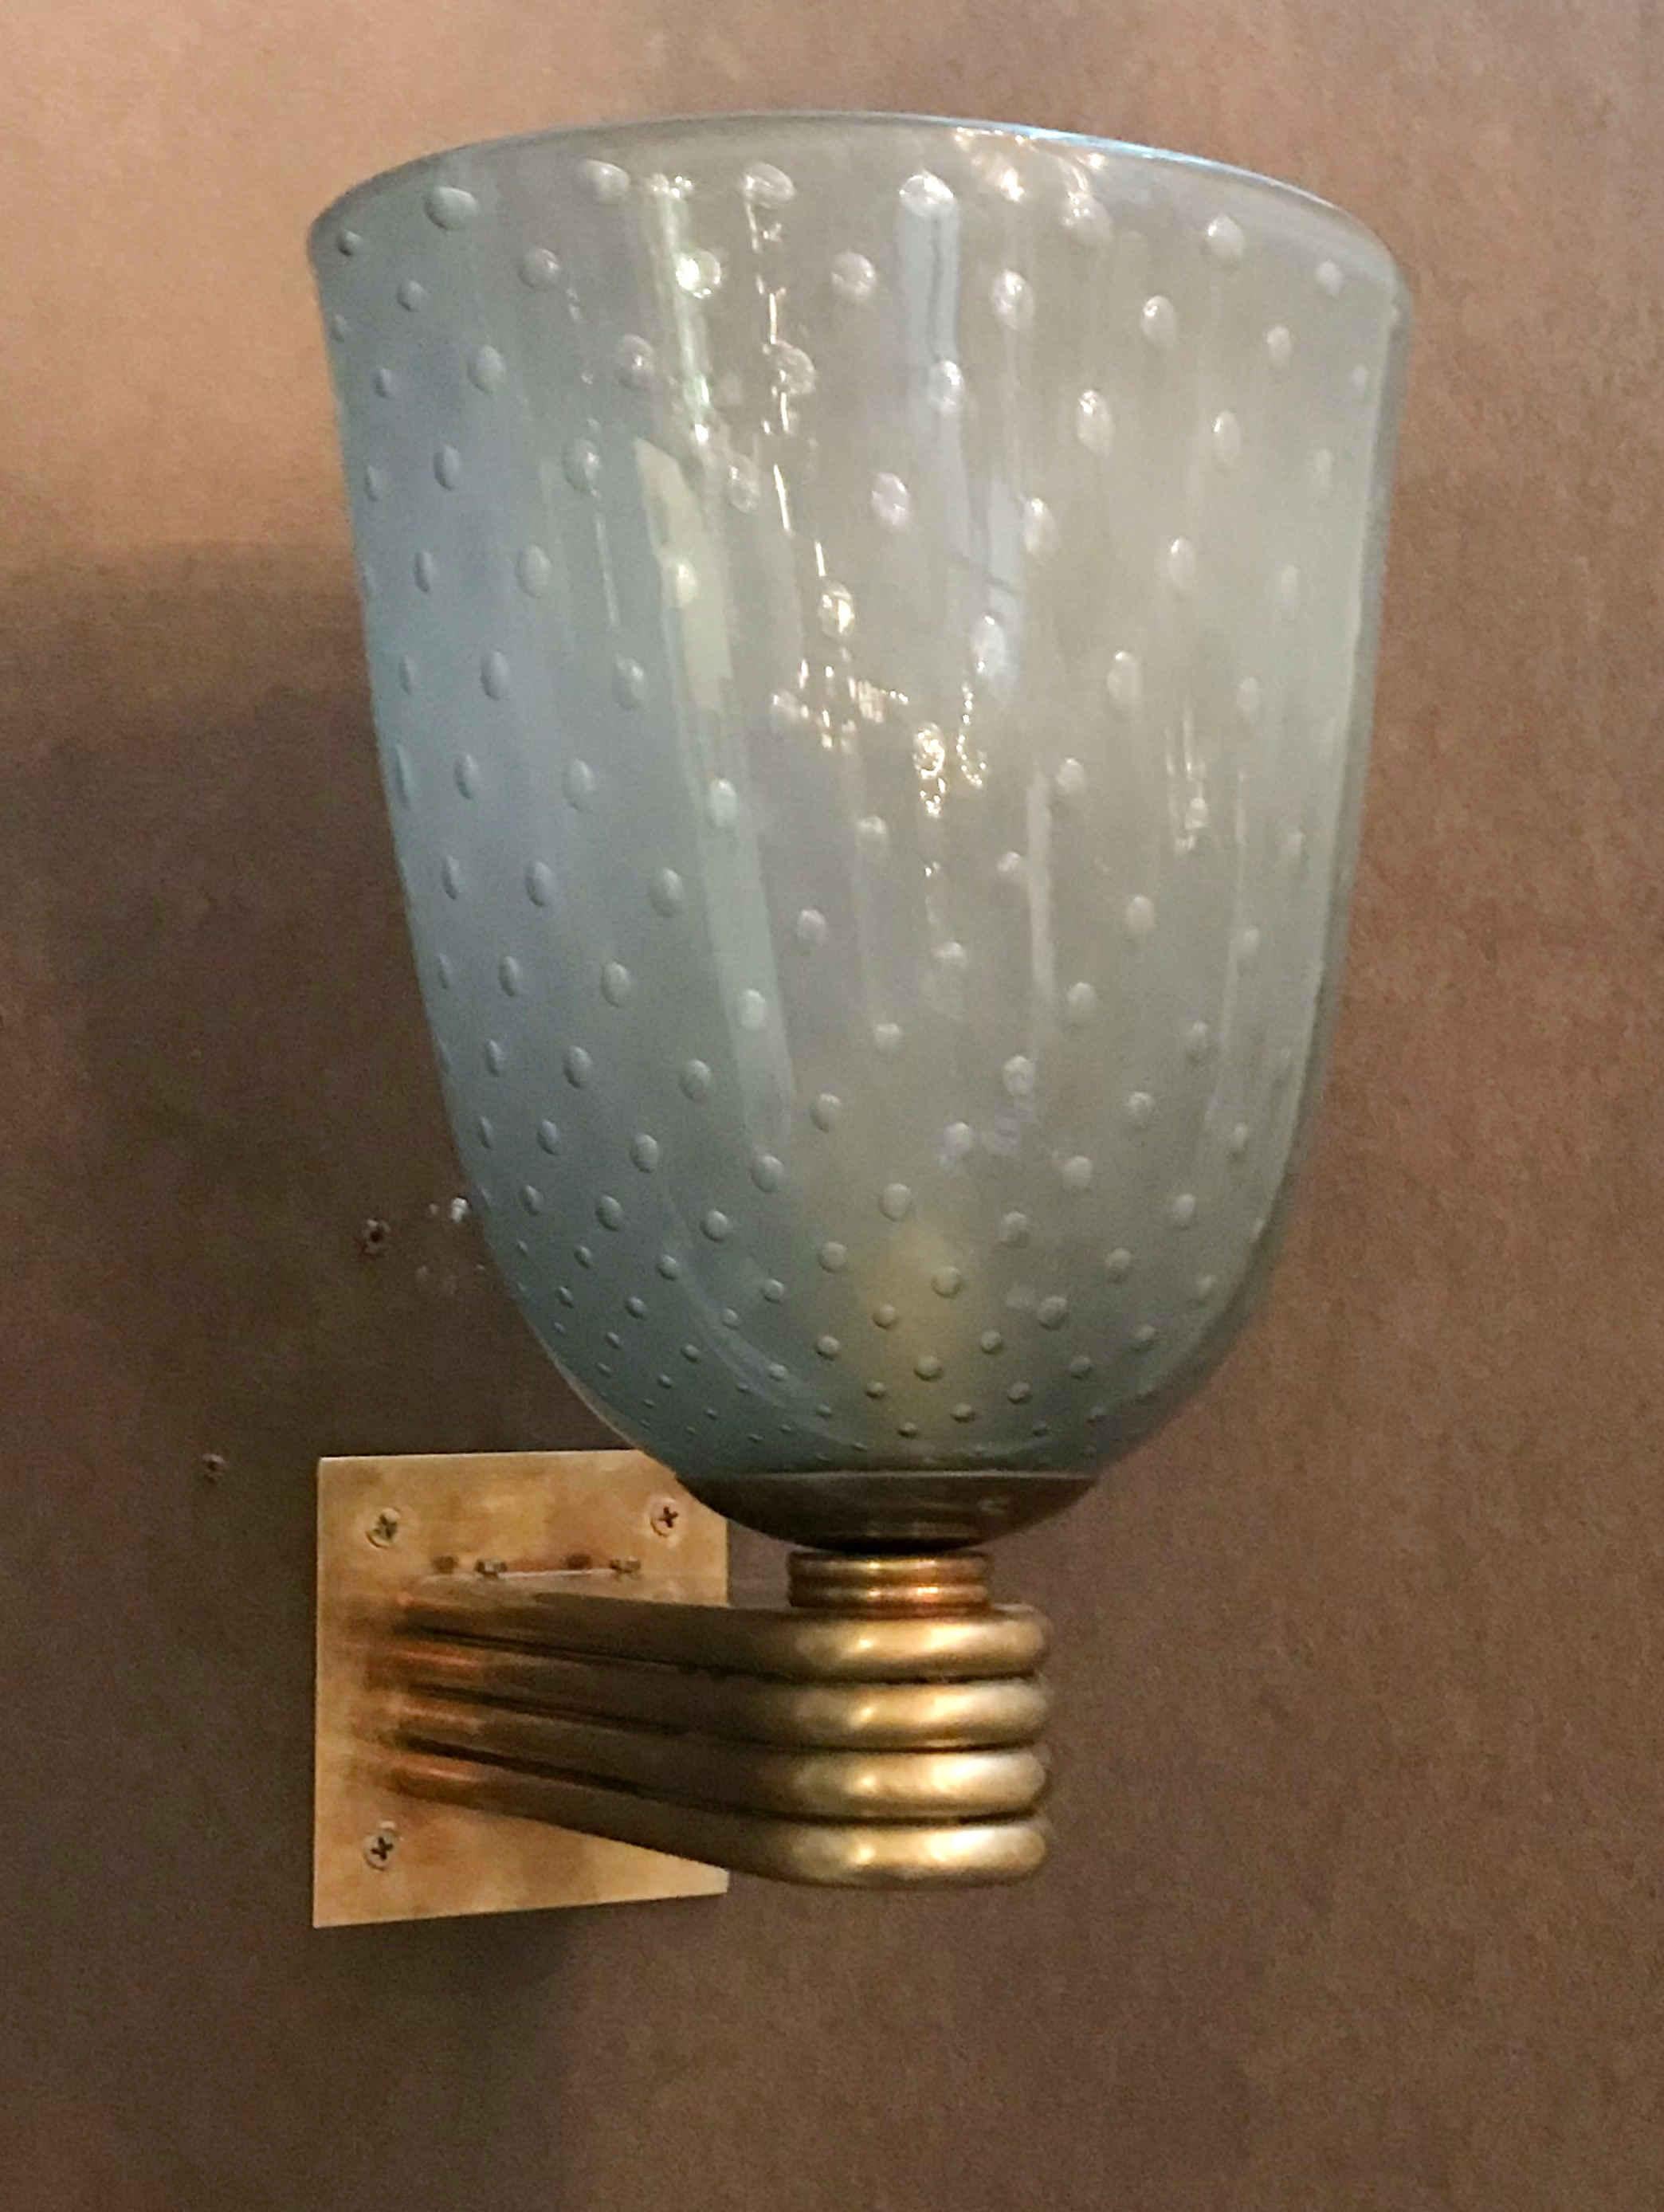 Vintage Italian wall lights with smoked gray Murano glass shades hand blown with bubbles using Bollicine technique and ribbed brass frame / Designed by Barovier e Toso, circa 1950s / Made in Italy / Original mark on the back plate'
1 light / E26 or